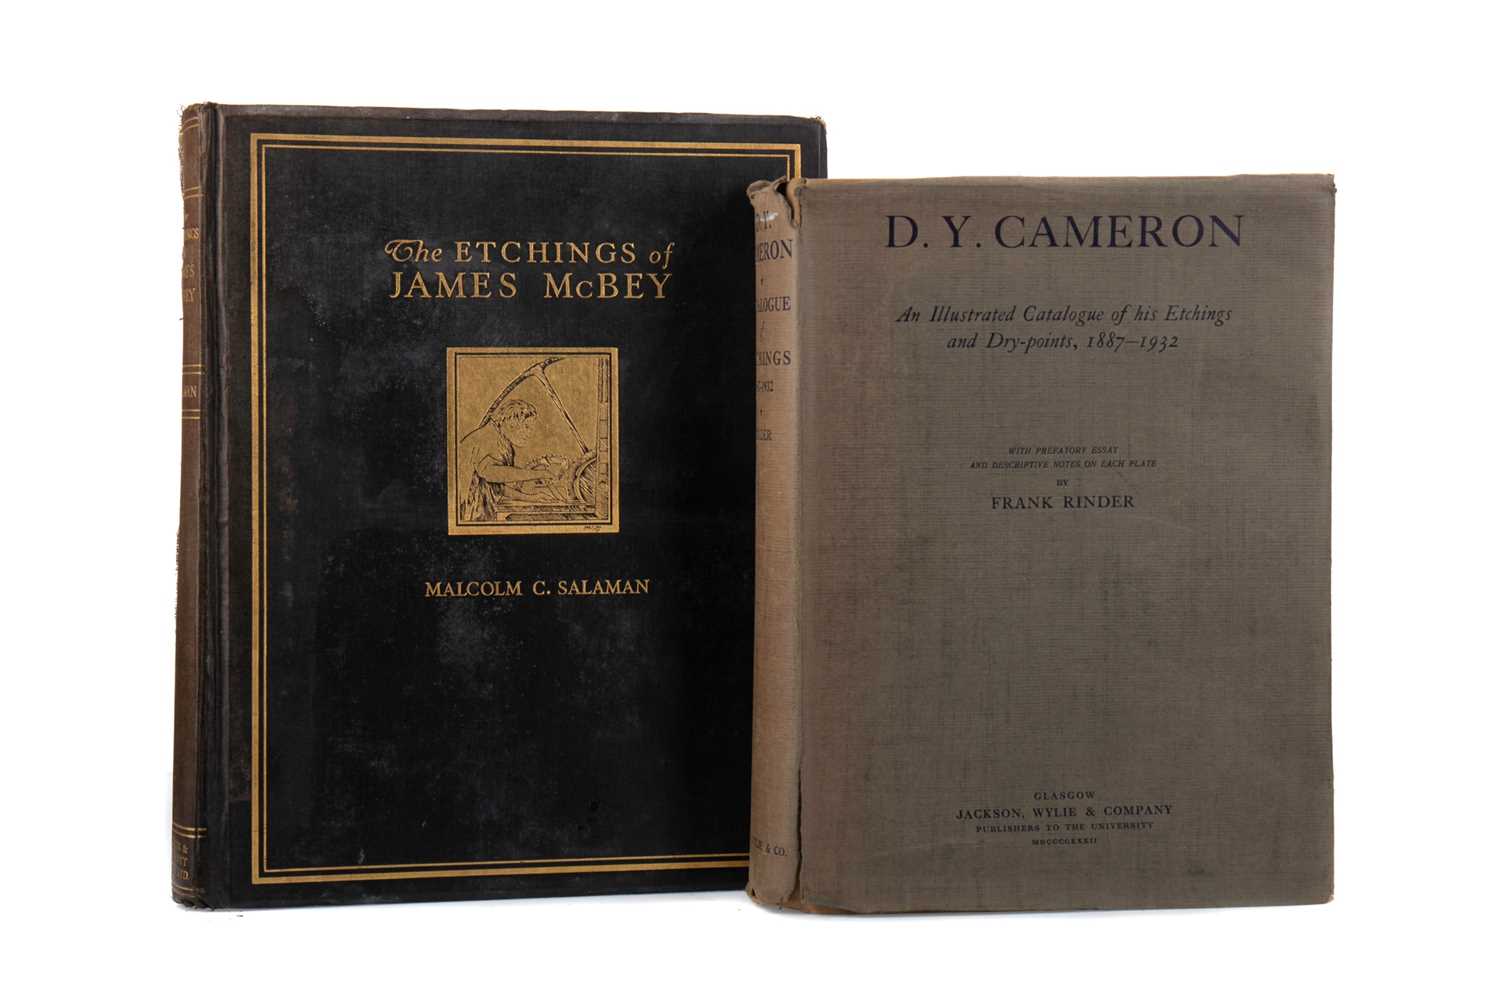 D.Y. CAMERON, AN ILLUSTRATED CATALOGUE OF HIS ETCHINGS AND DRYPOINTS, ALONG WITH THE ETCHINGS OF MCB